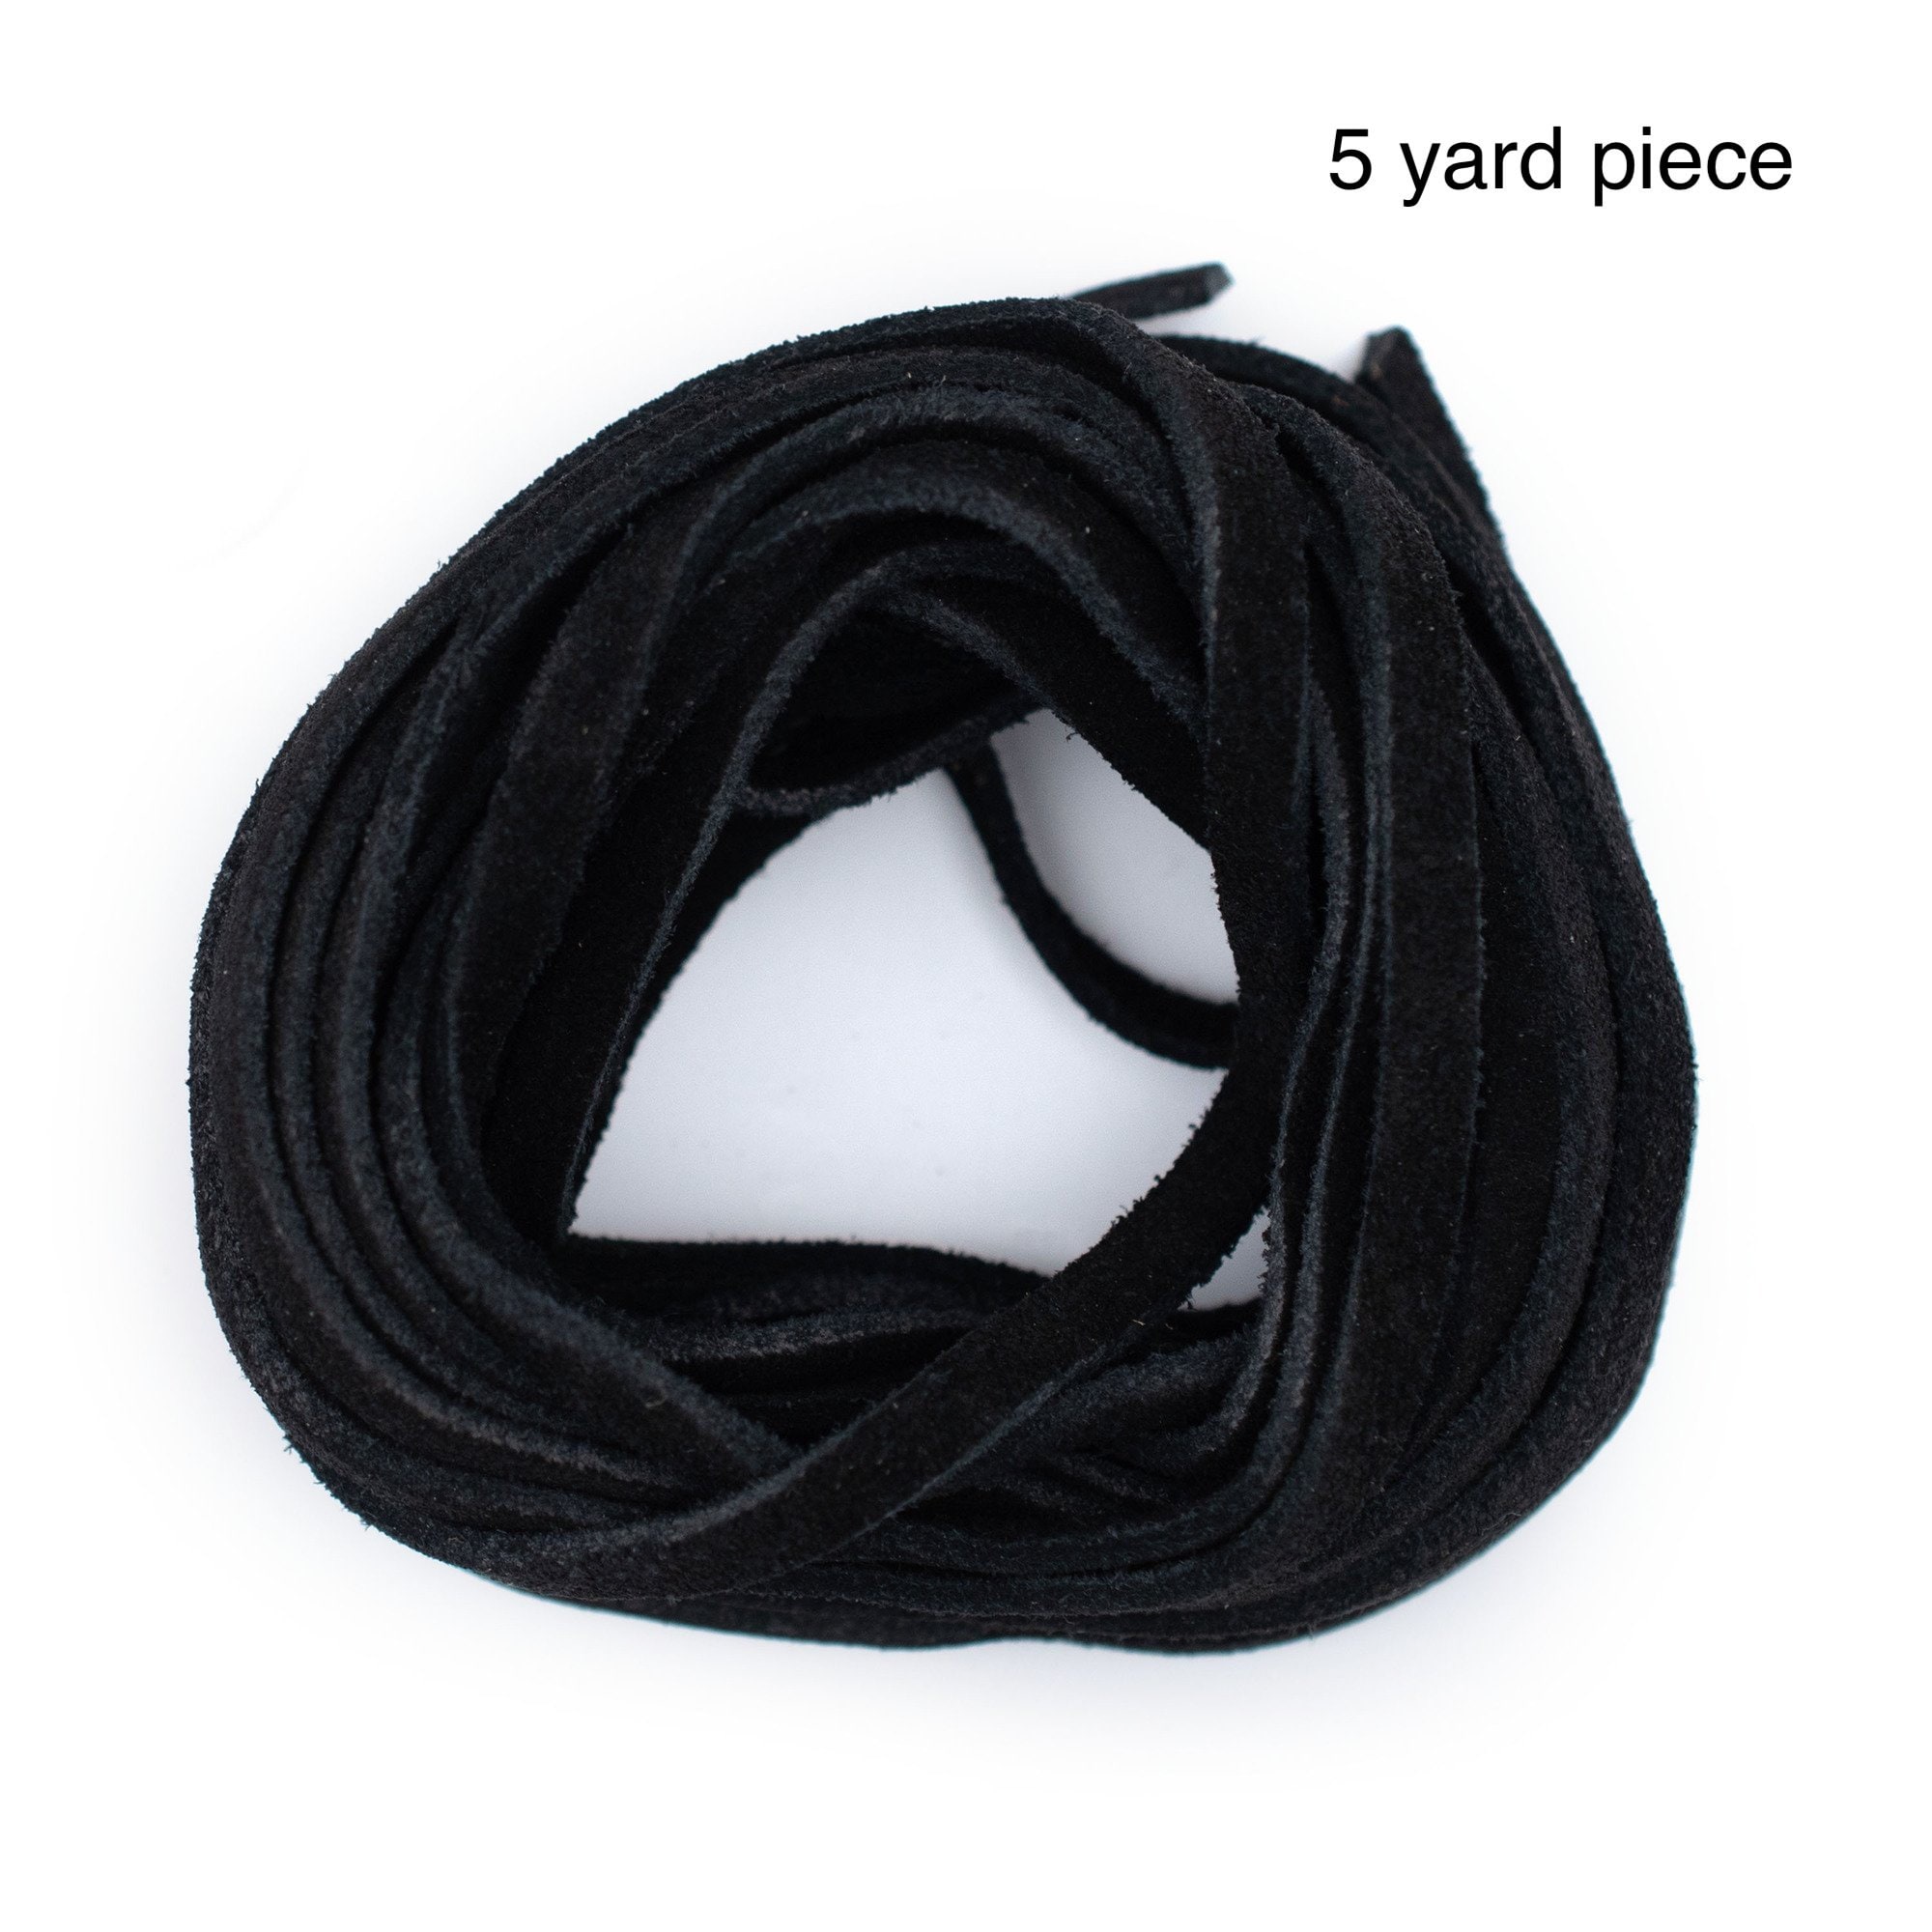 BeadsTreasure Black Suede Cord Lace Leather Cord for Jewelry